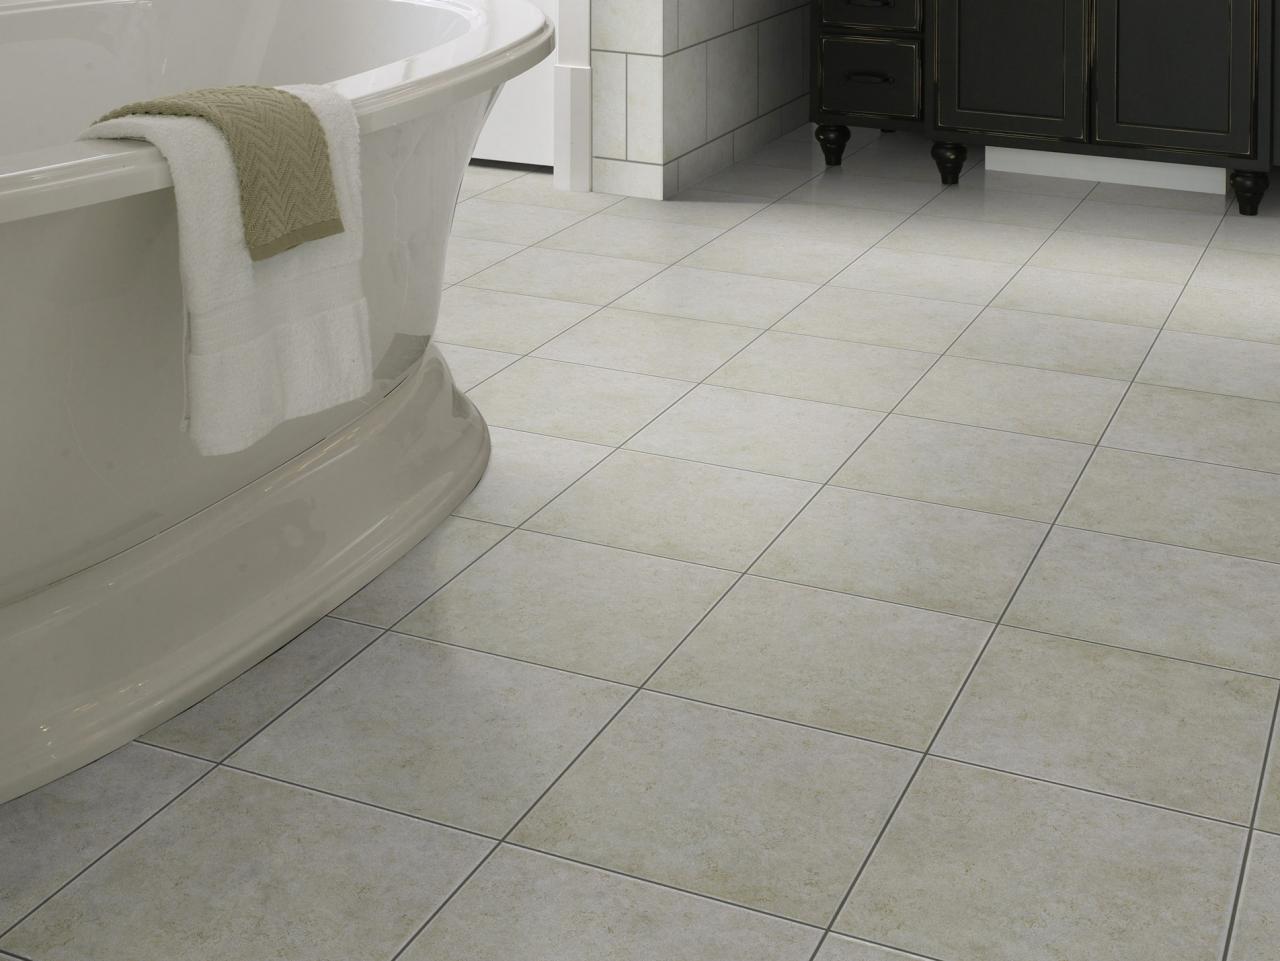 Why Homeowners Love Ceramic Tile, What Is The Cost Per Square Foot To Install Ceramic Tile